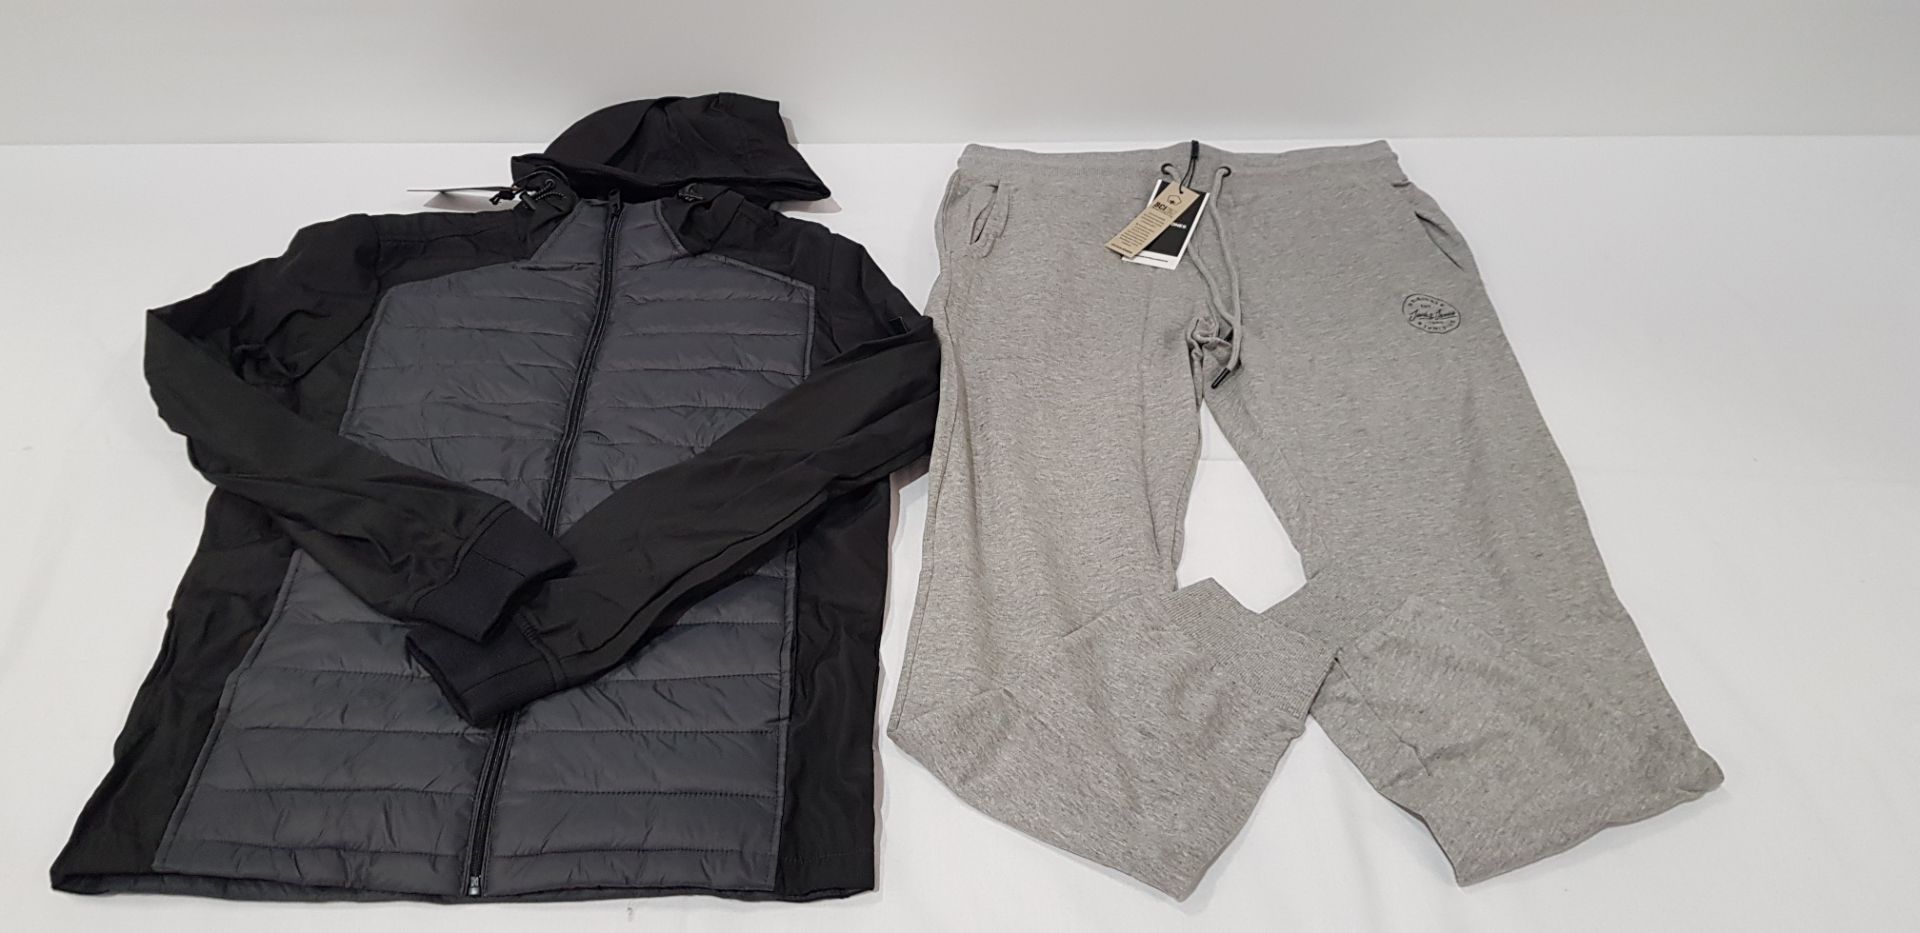 14 X BRAND NEW MIXED LOT CONTAINING 8 JACK AND JONES GREY JOGGING BOTTOM, SIZES INCLUDE 2 SMALL, 4